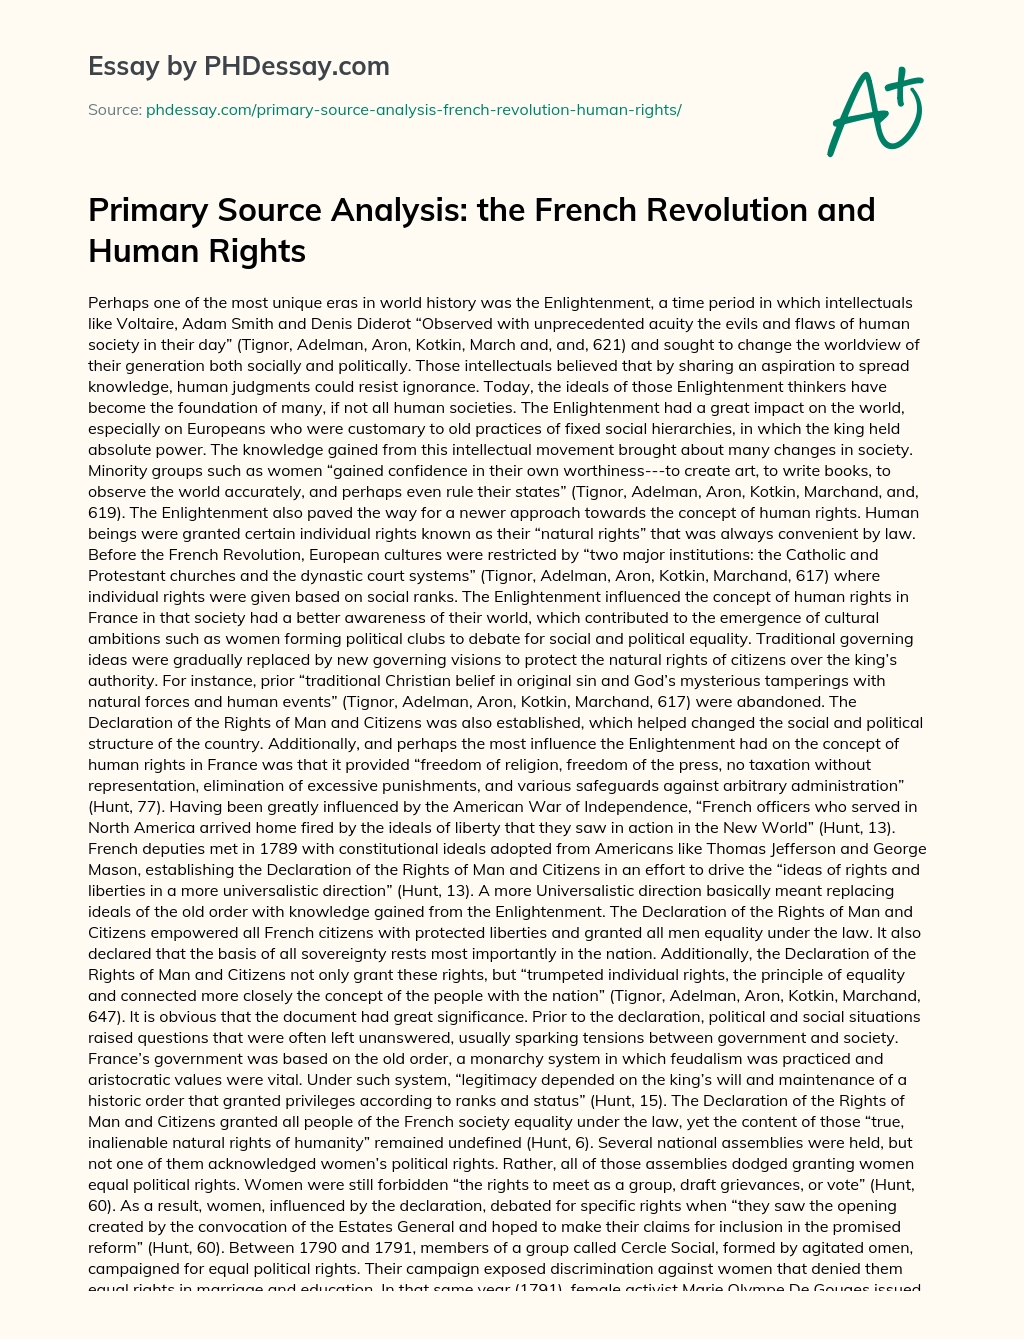 Primary Source Analysis: the French Revolution and Human Rights essay